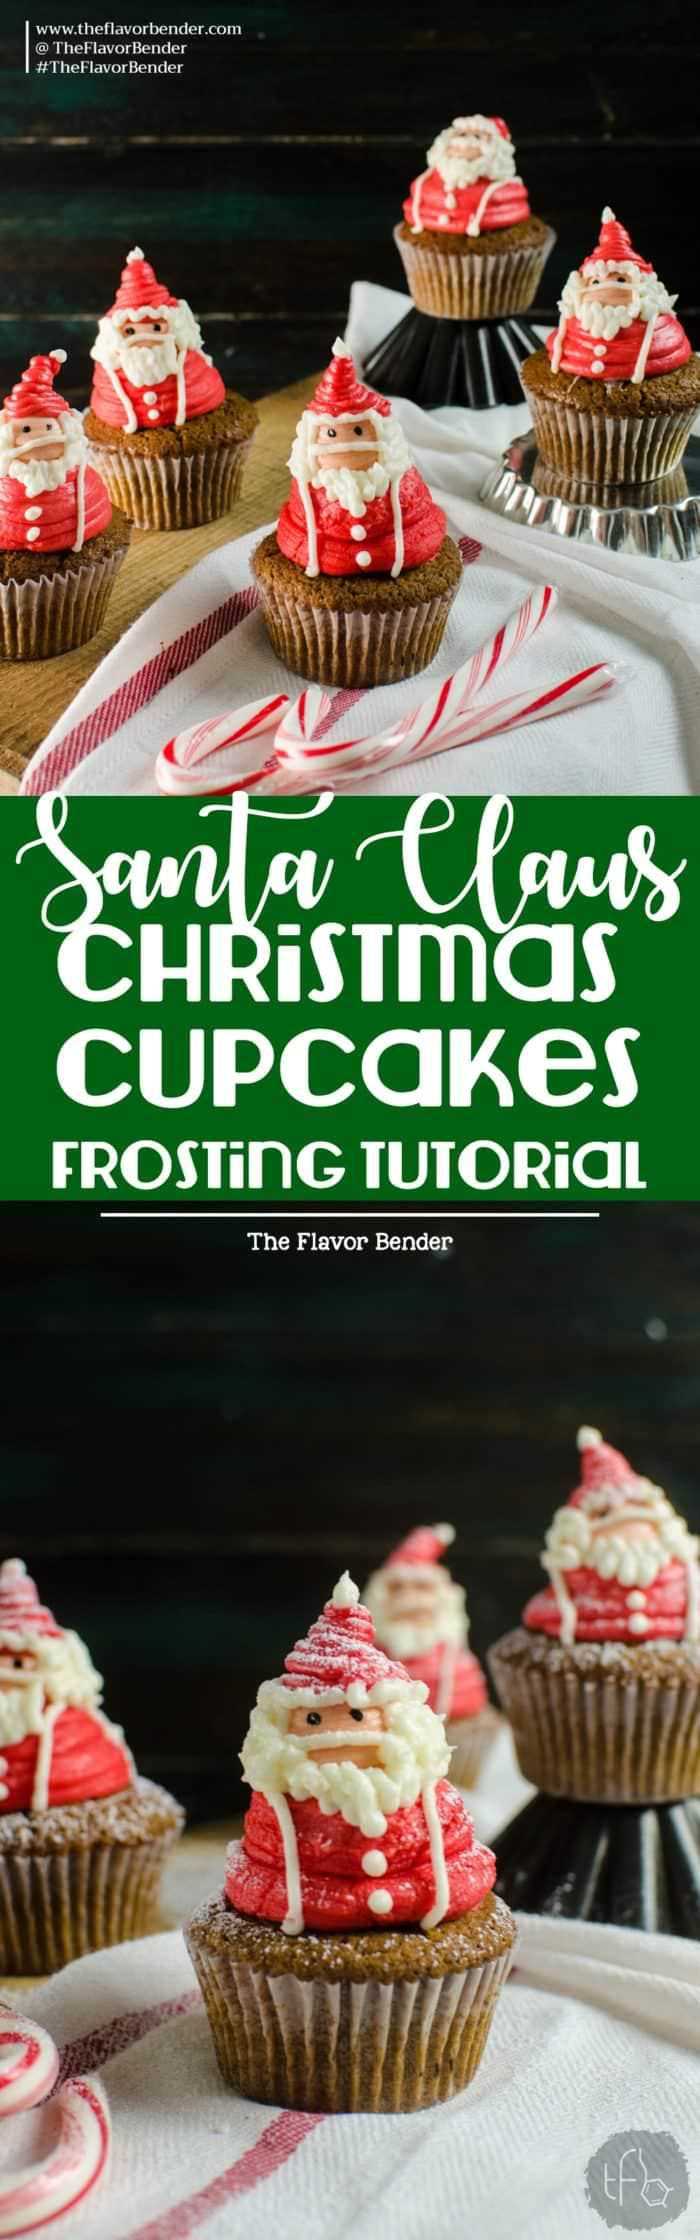 Santa Claus Cupcakes - An easy to follow STEP BY STEP (GIF & Printable) frosting guide for awesome Santa Claus Cupcakes (Christmas cupcakes) with a cream cheese frosting decoration!